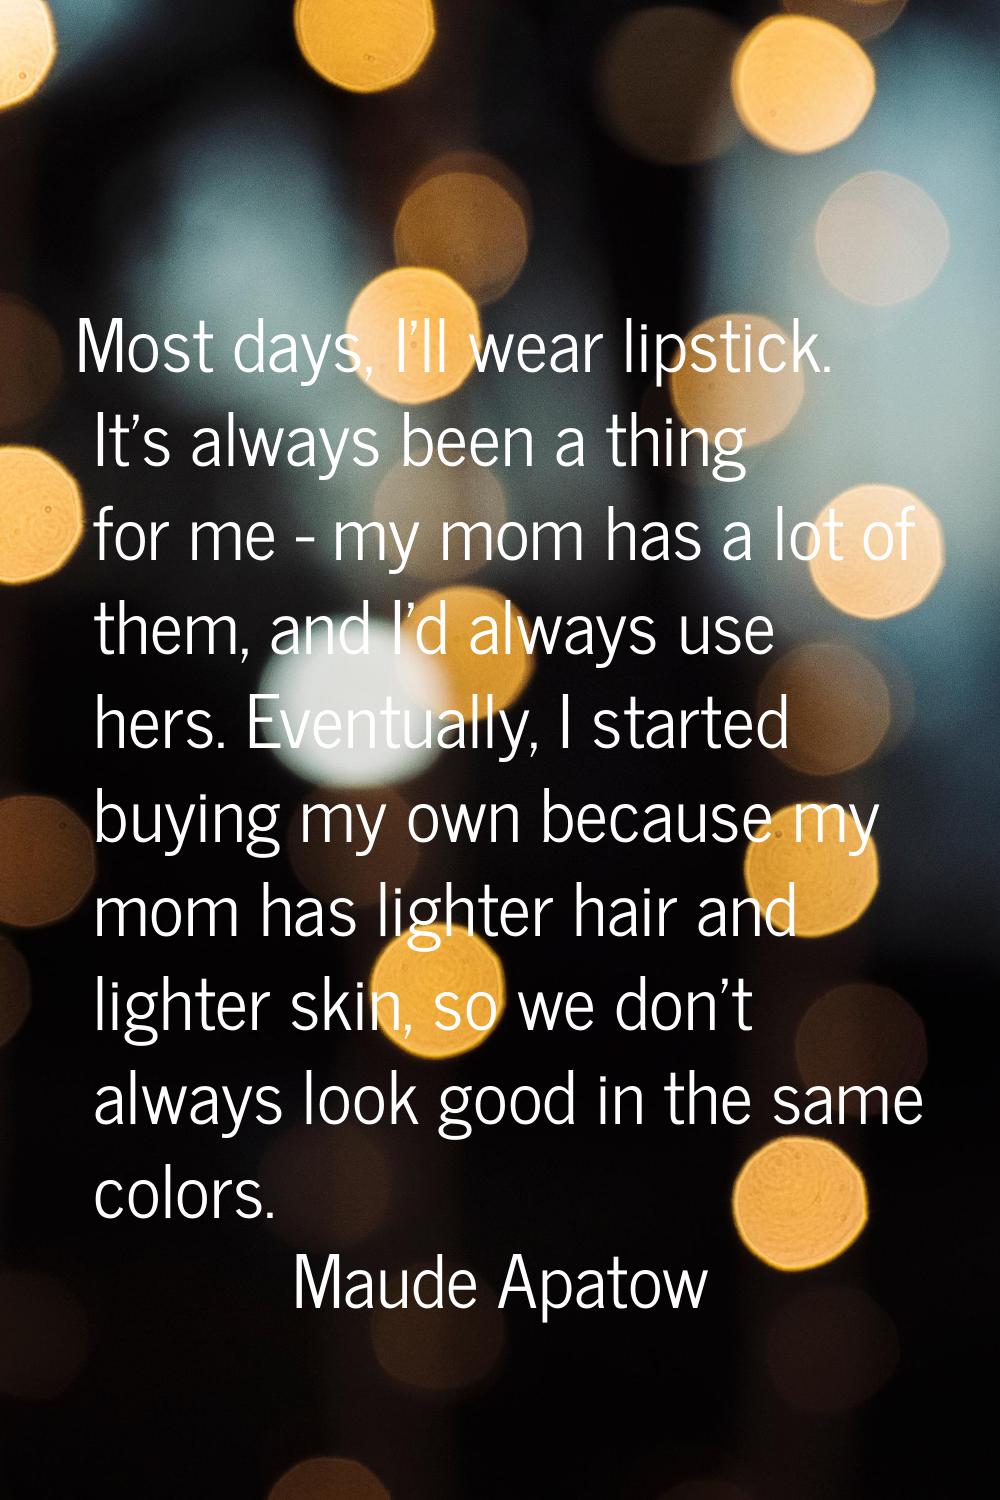 Most days, I'll wear lipstick. It's always been a thing for me - my mom has a lot of them, and I'd 